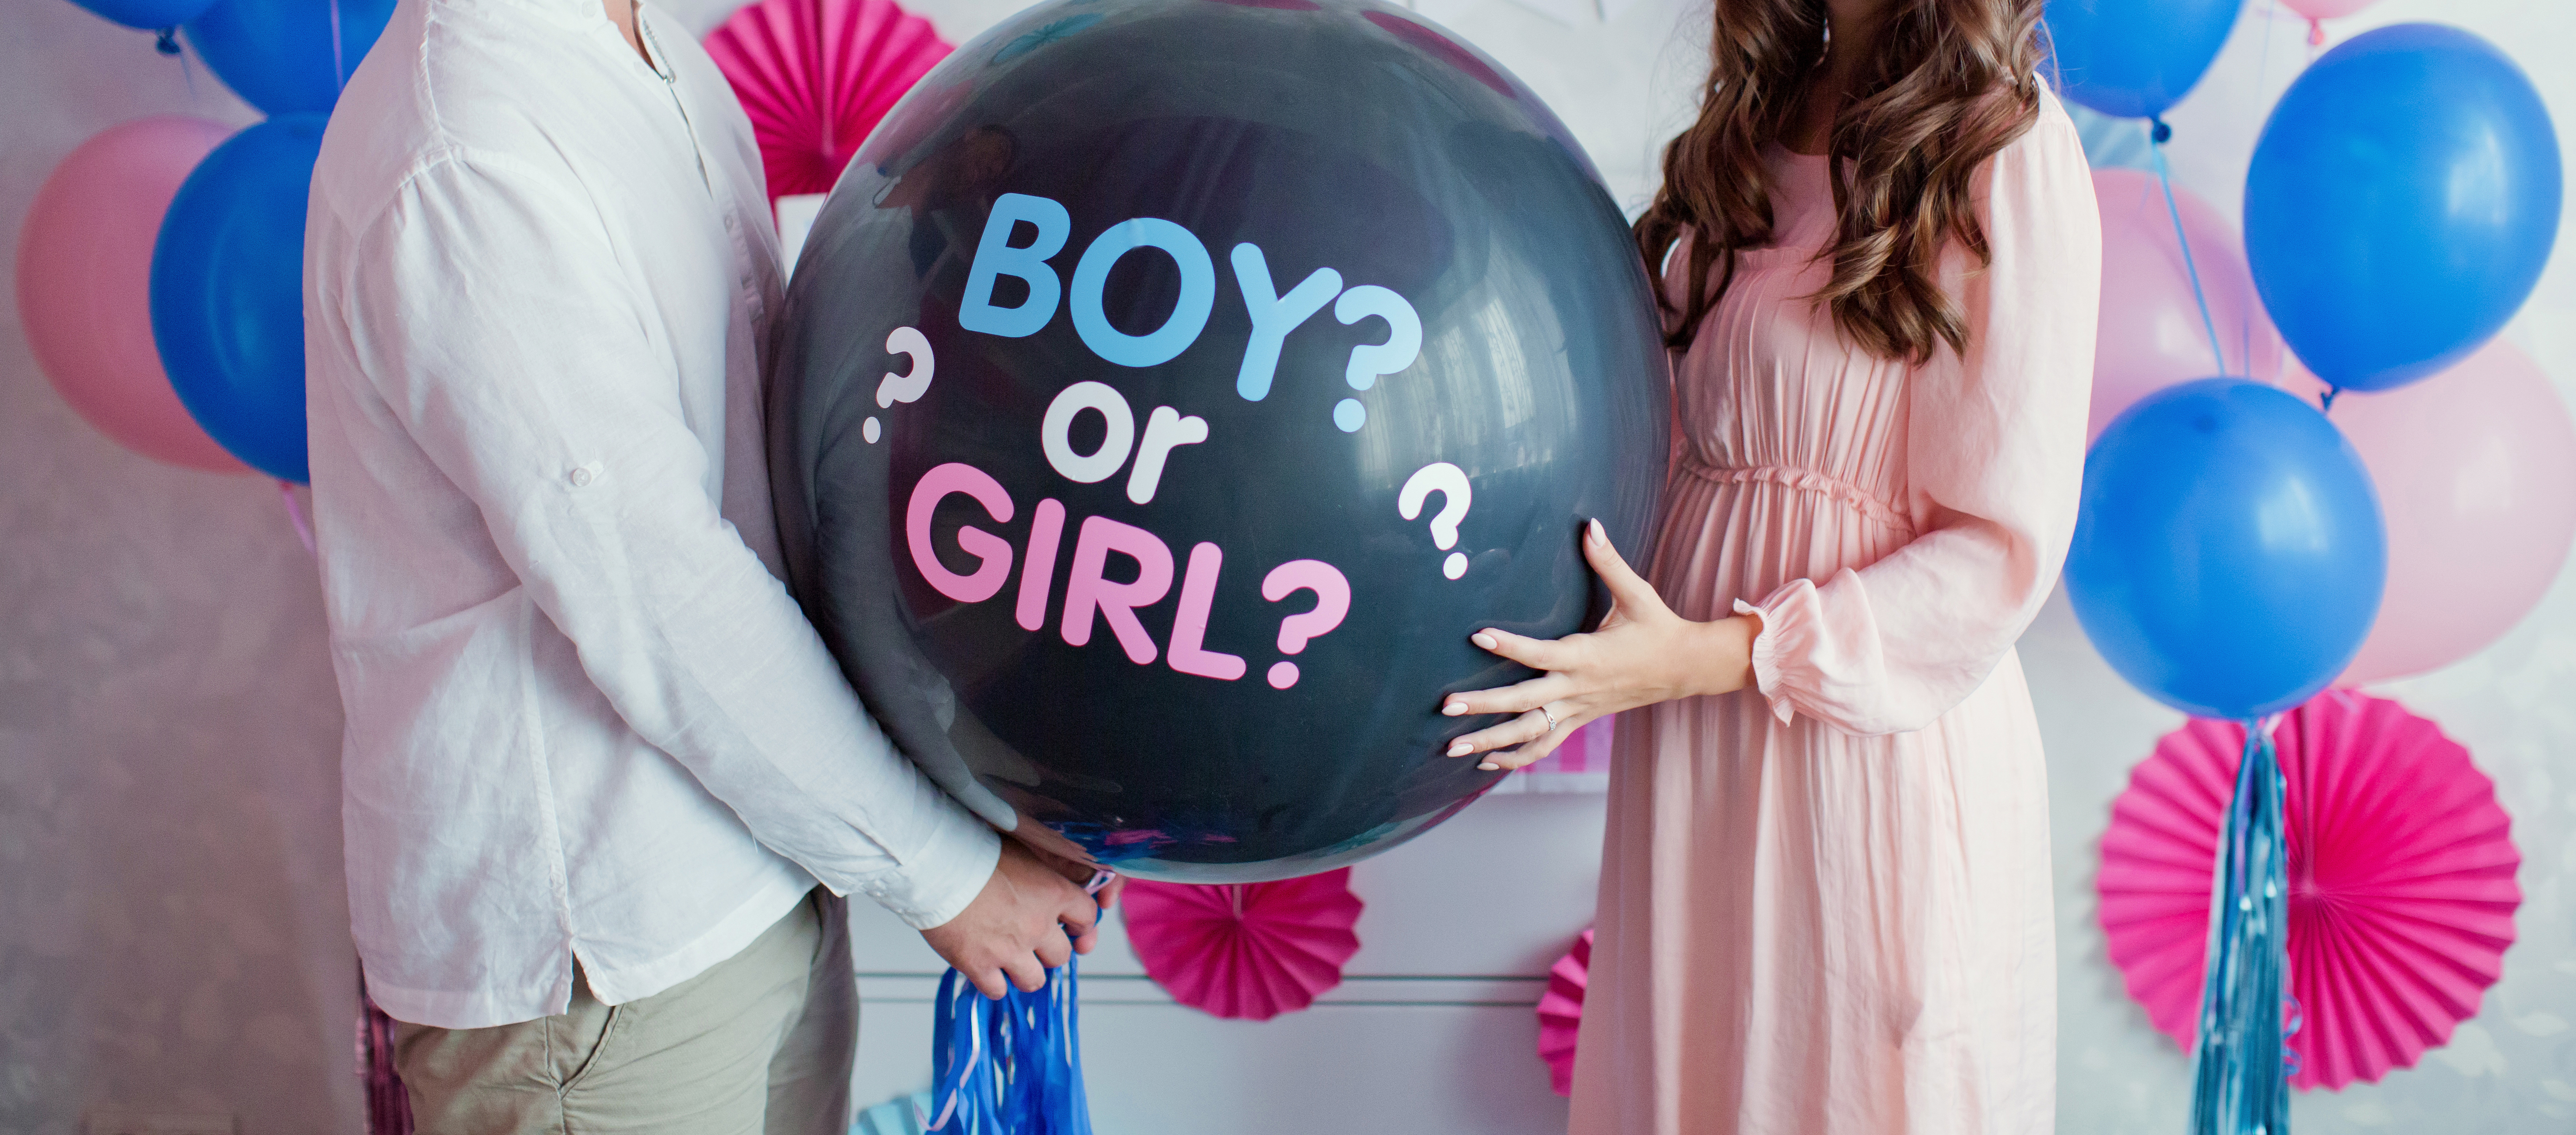 Man and woman holding a black balloon with "boy or girl?" during a gender reveal party | Source: Shutterstock